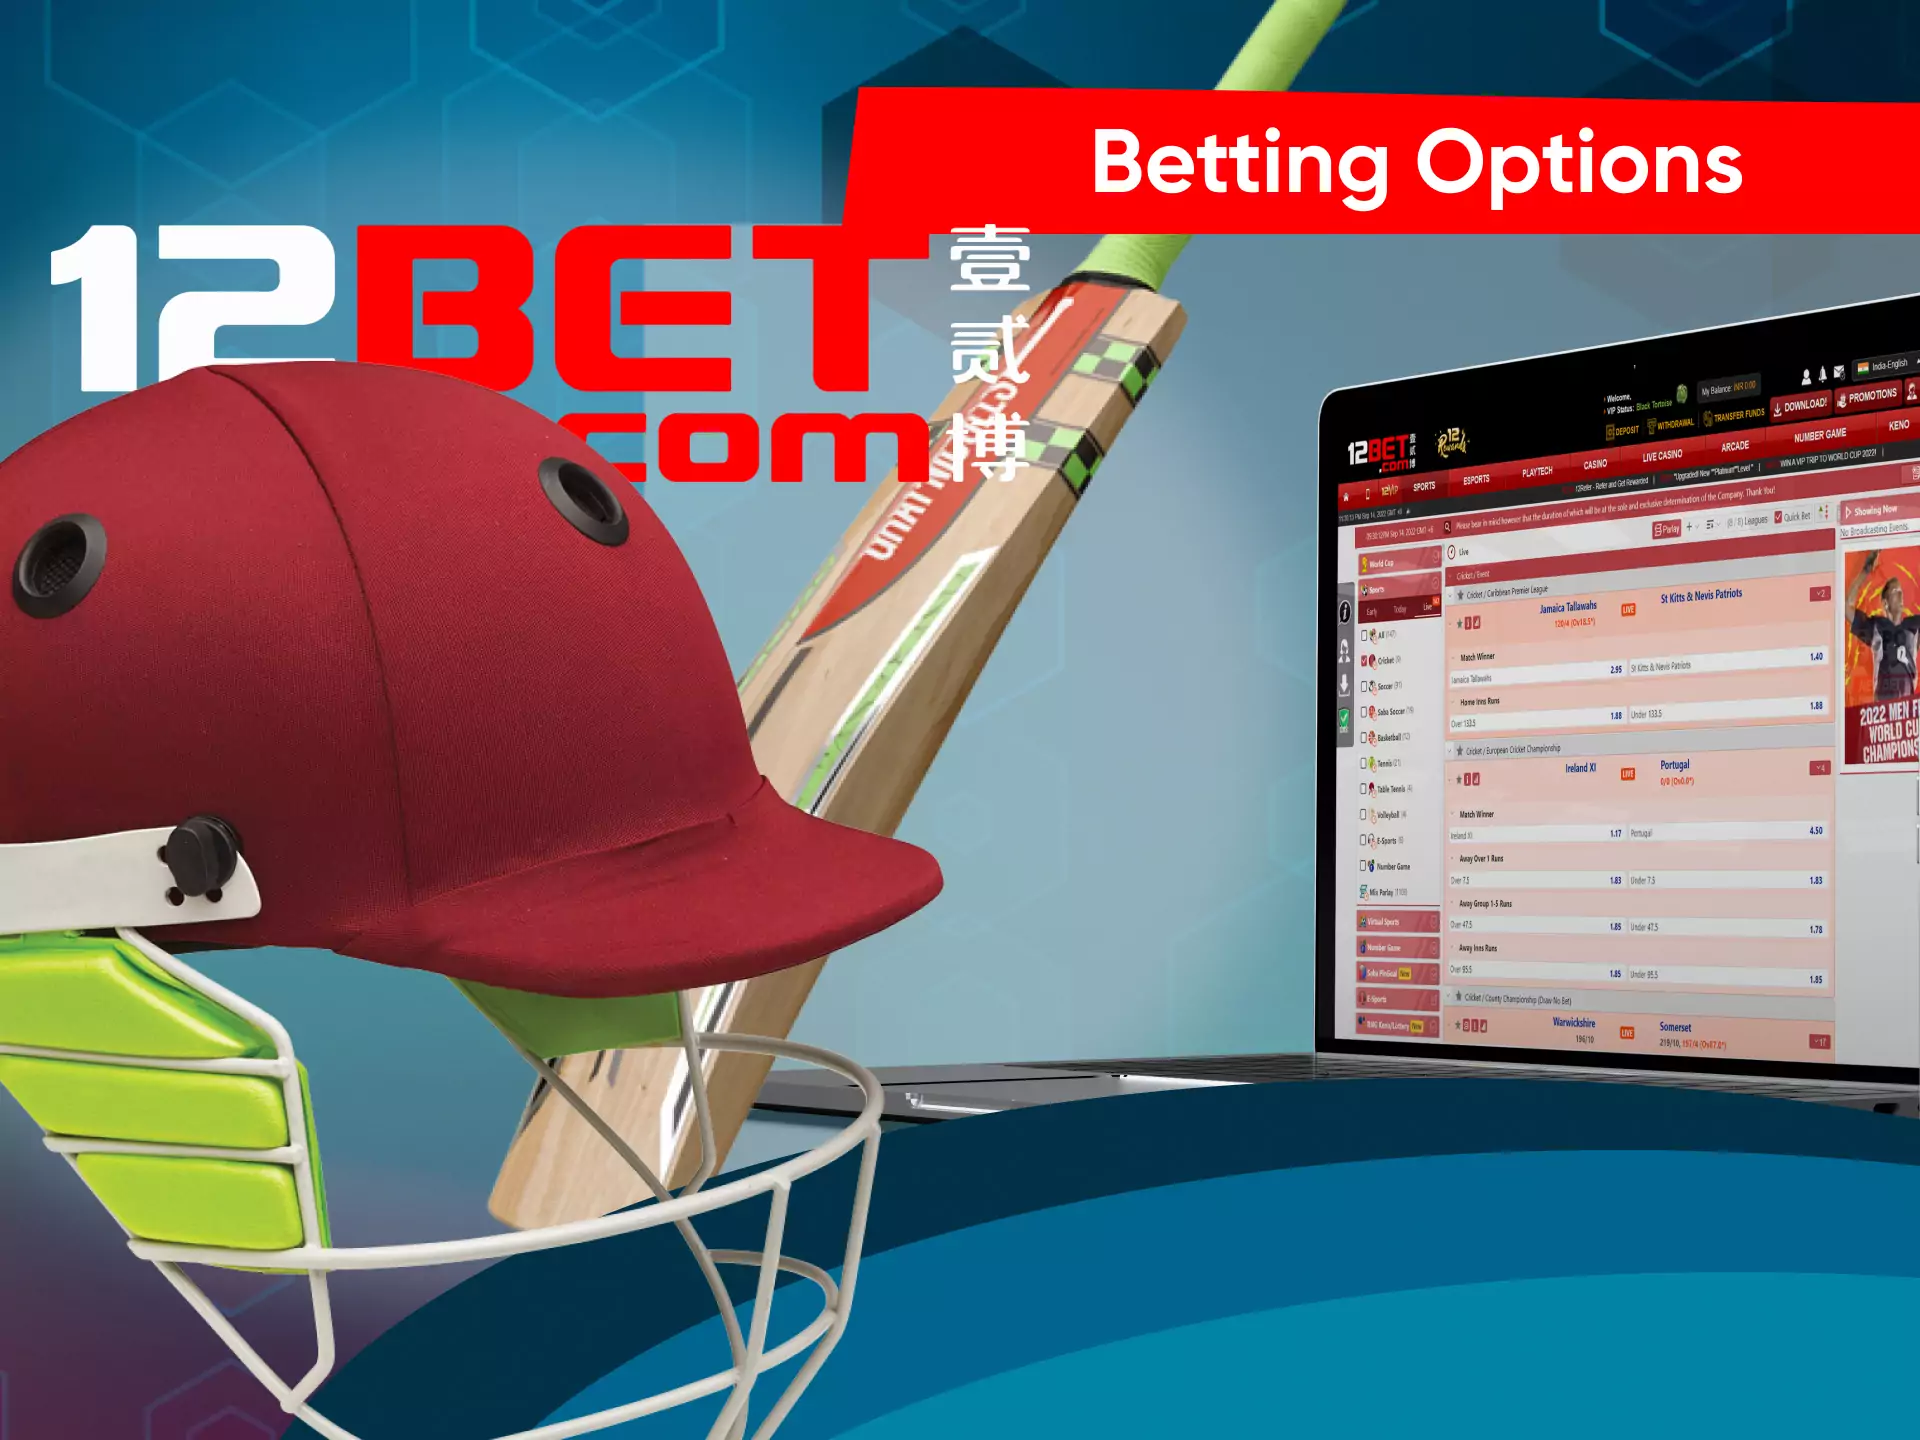 Betting options on 12bet are various.